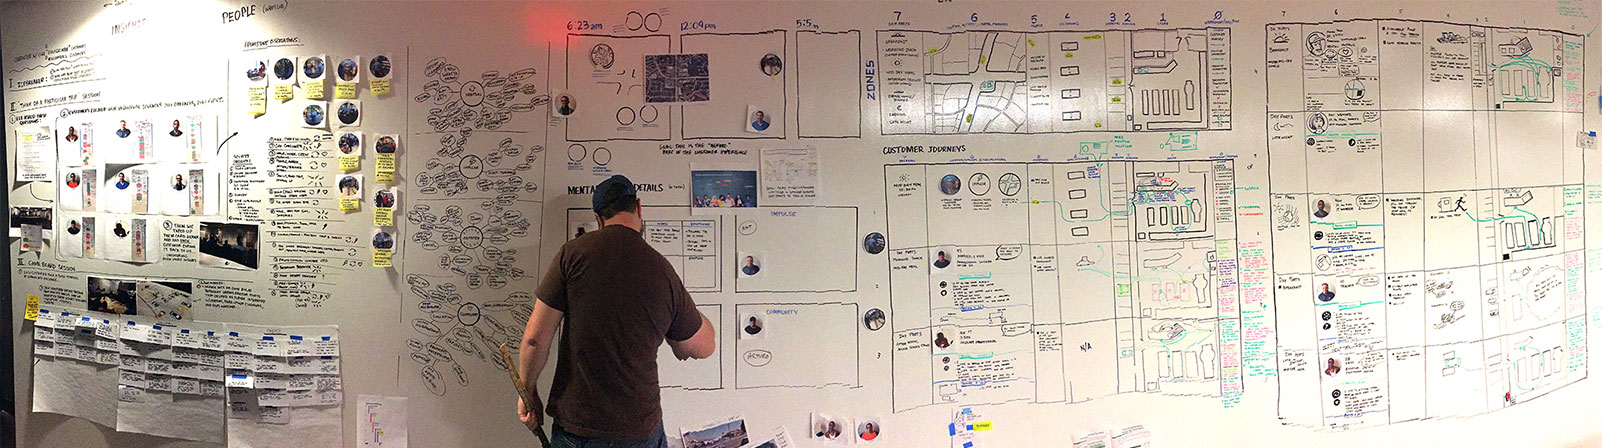 wide angle view of Rocketeer drawing on whiteboard in the midding of a large amount of reasearch on the wall next to him.